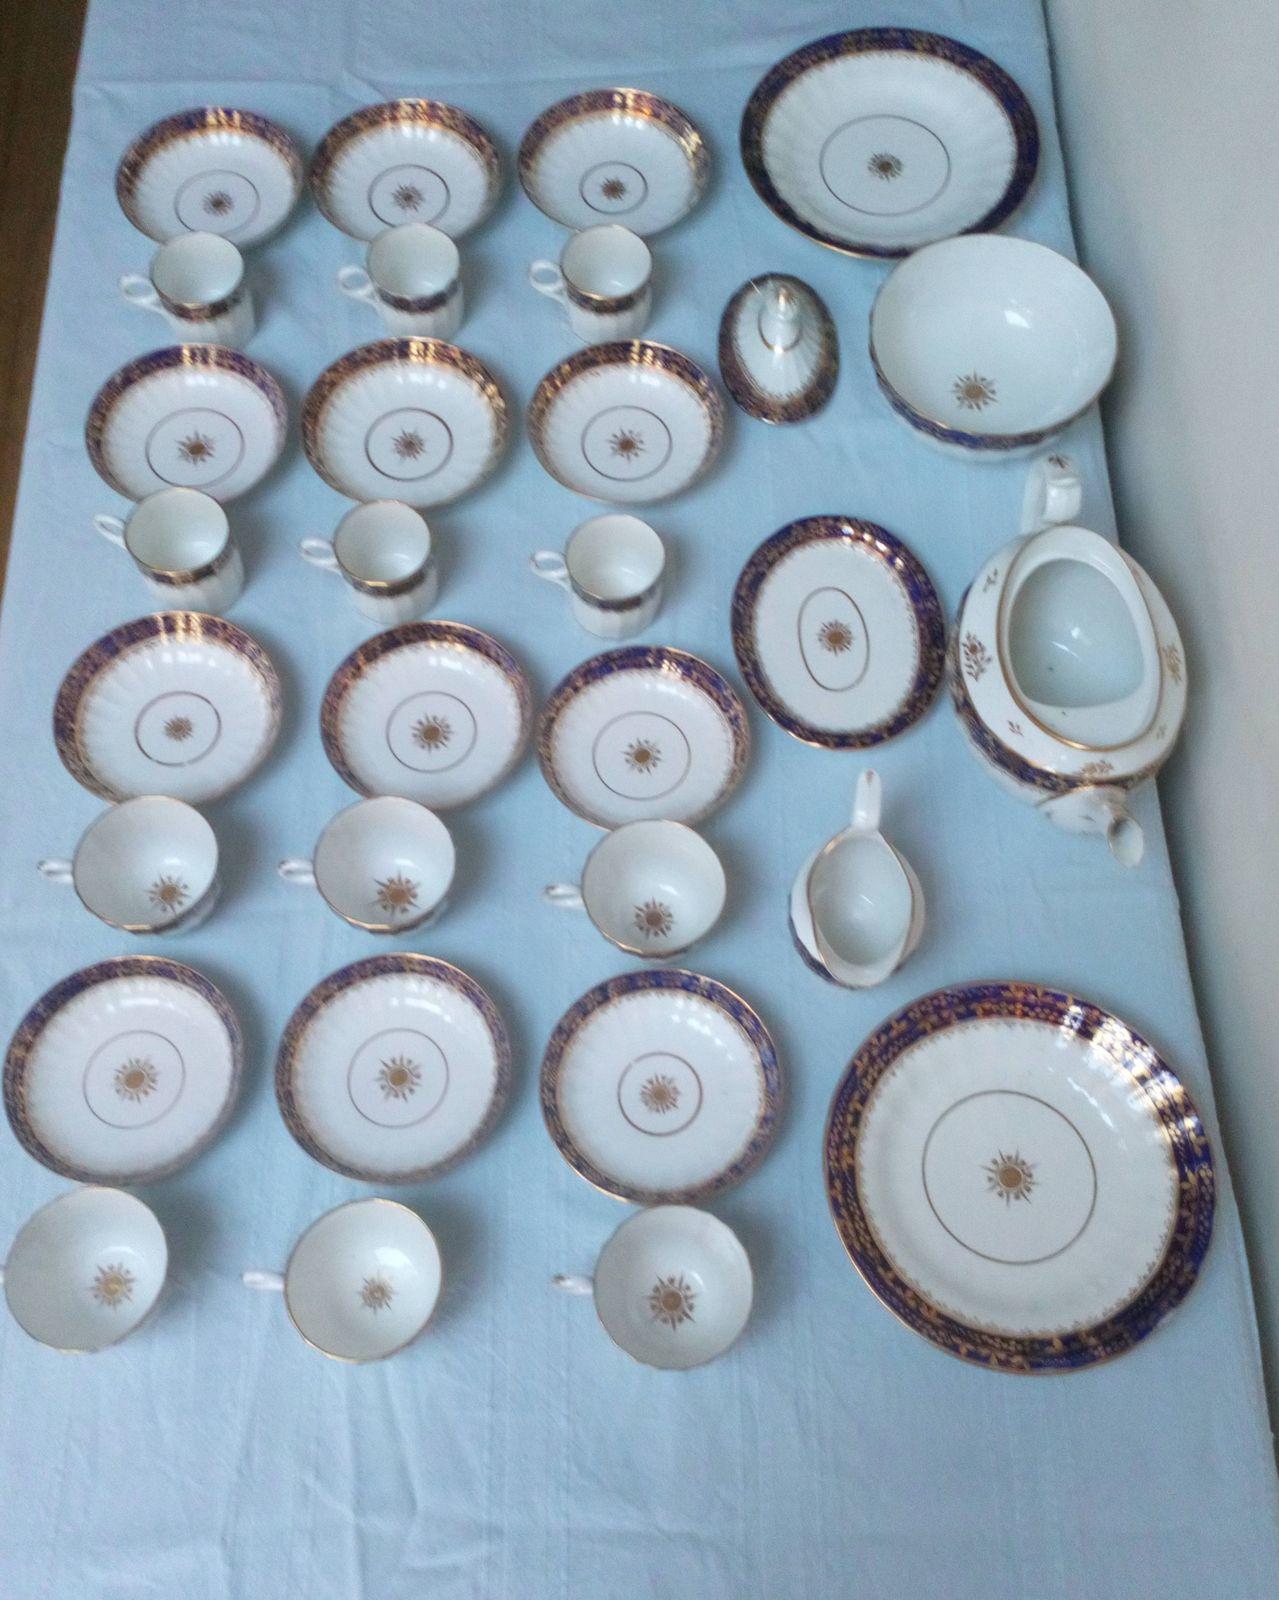 An antique Thomas Grainger Worcester Porcelain tea and coffee service with Hamilton Fluted Tea cups and coffee cans  and fluted new oval shaped teapot decorated with an under glaze blue band with gilded grapevines. Pattern number 195 circa 1810